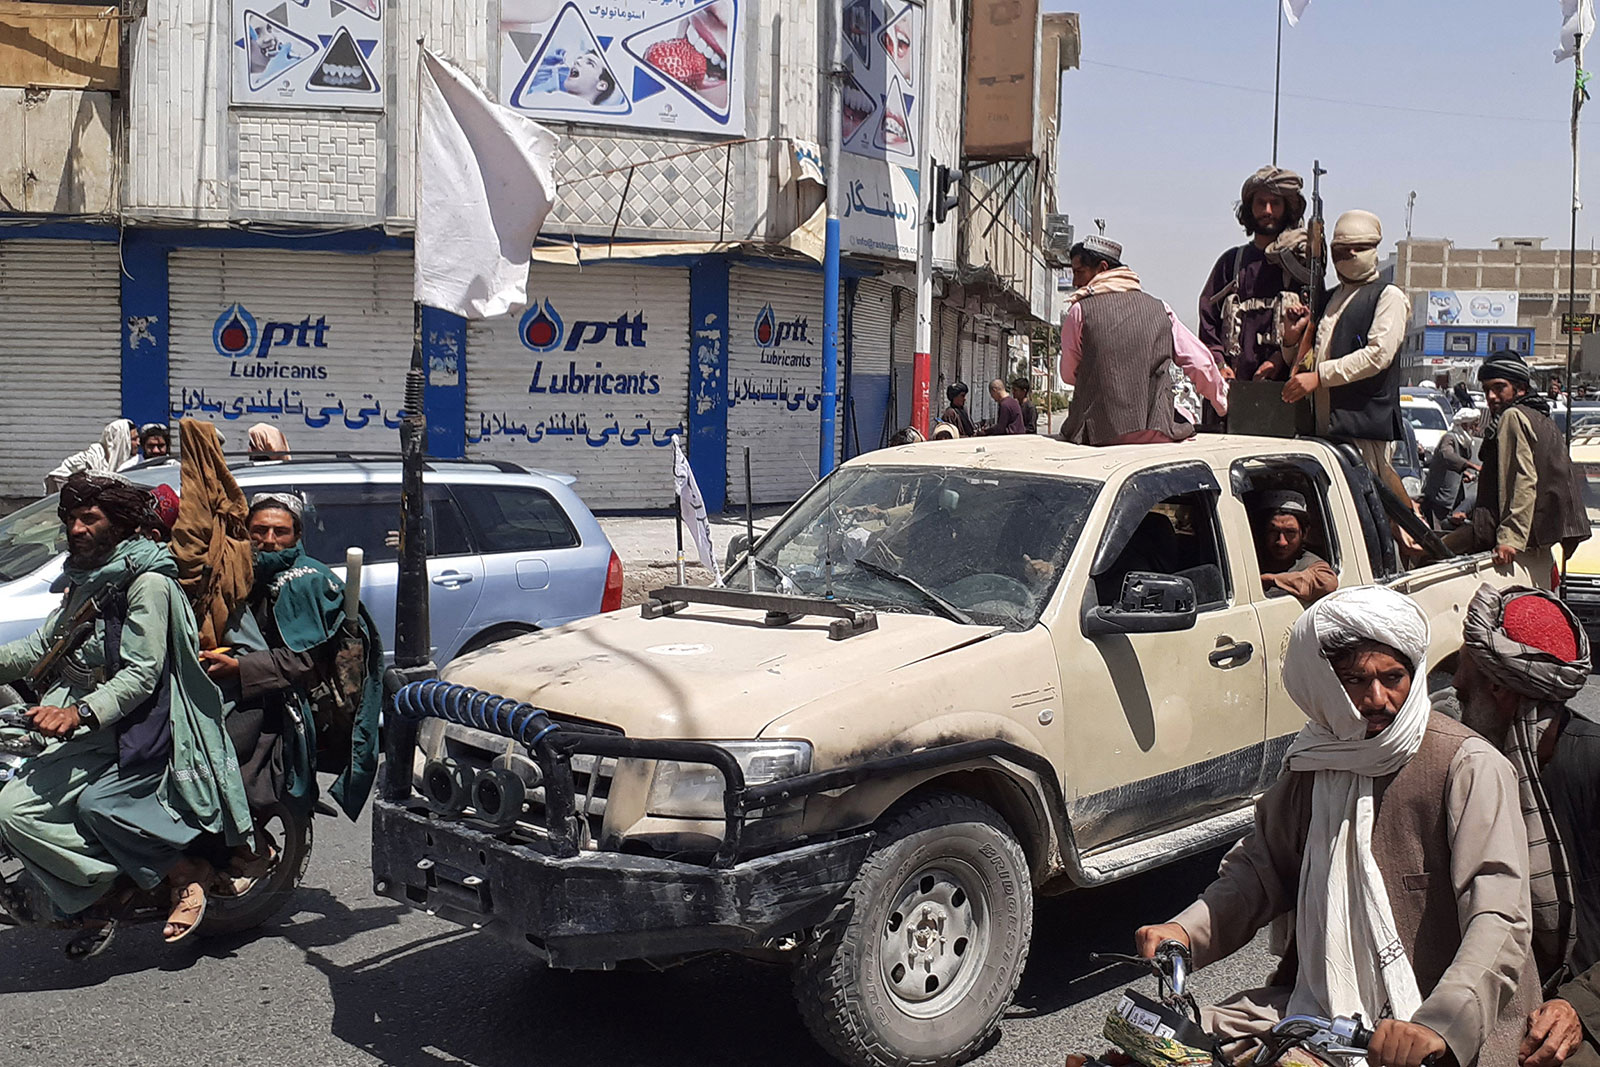 Taliban fighters drive an Afghan National Army vehicle through a street in Kandahar on August 13.